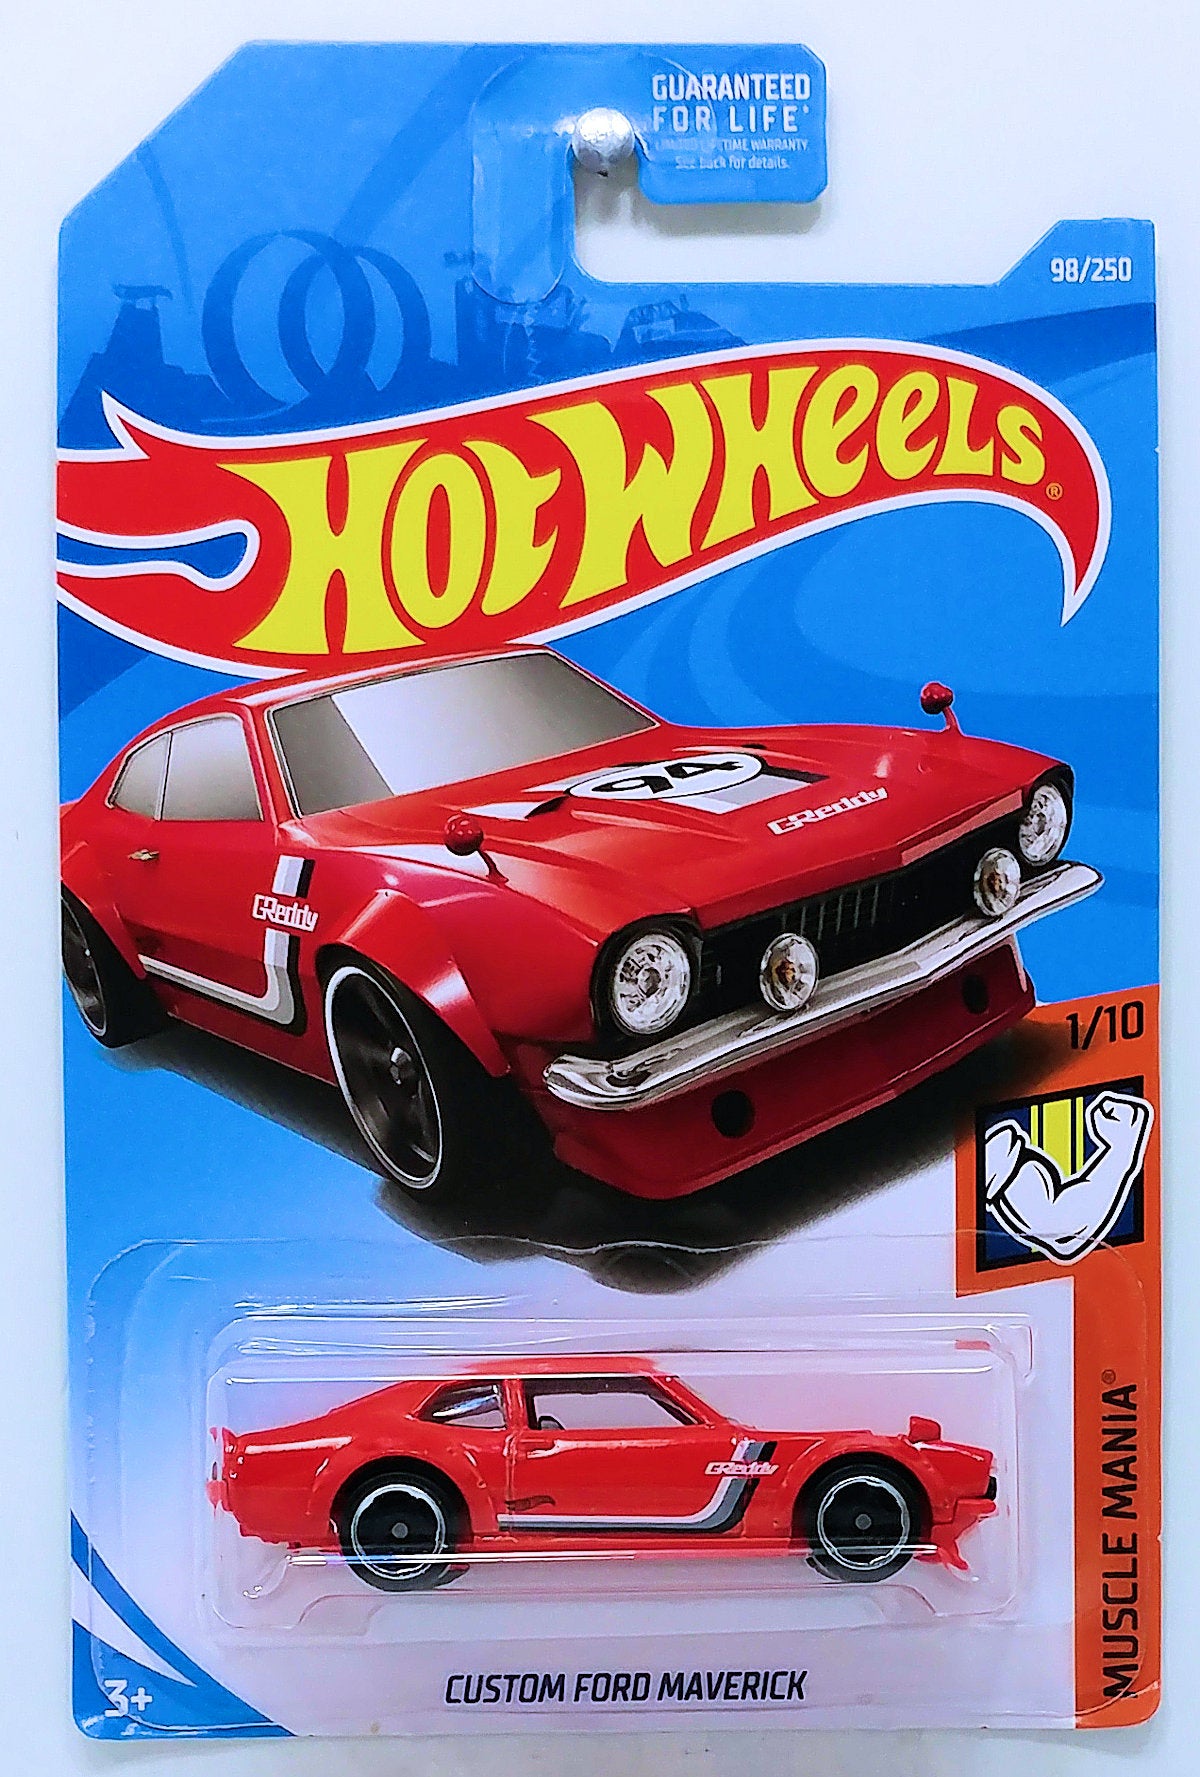 Hot Wheels 2019 - Collector # 098/250 - Muscle Mania 1/10 - Custom Ford Maverick - Red - USA